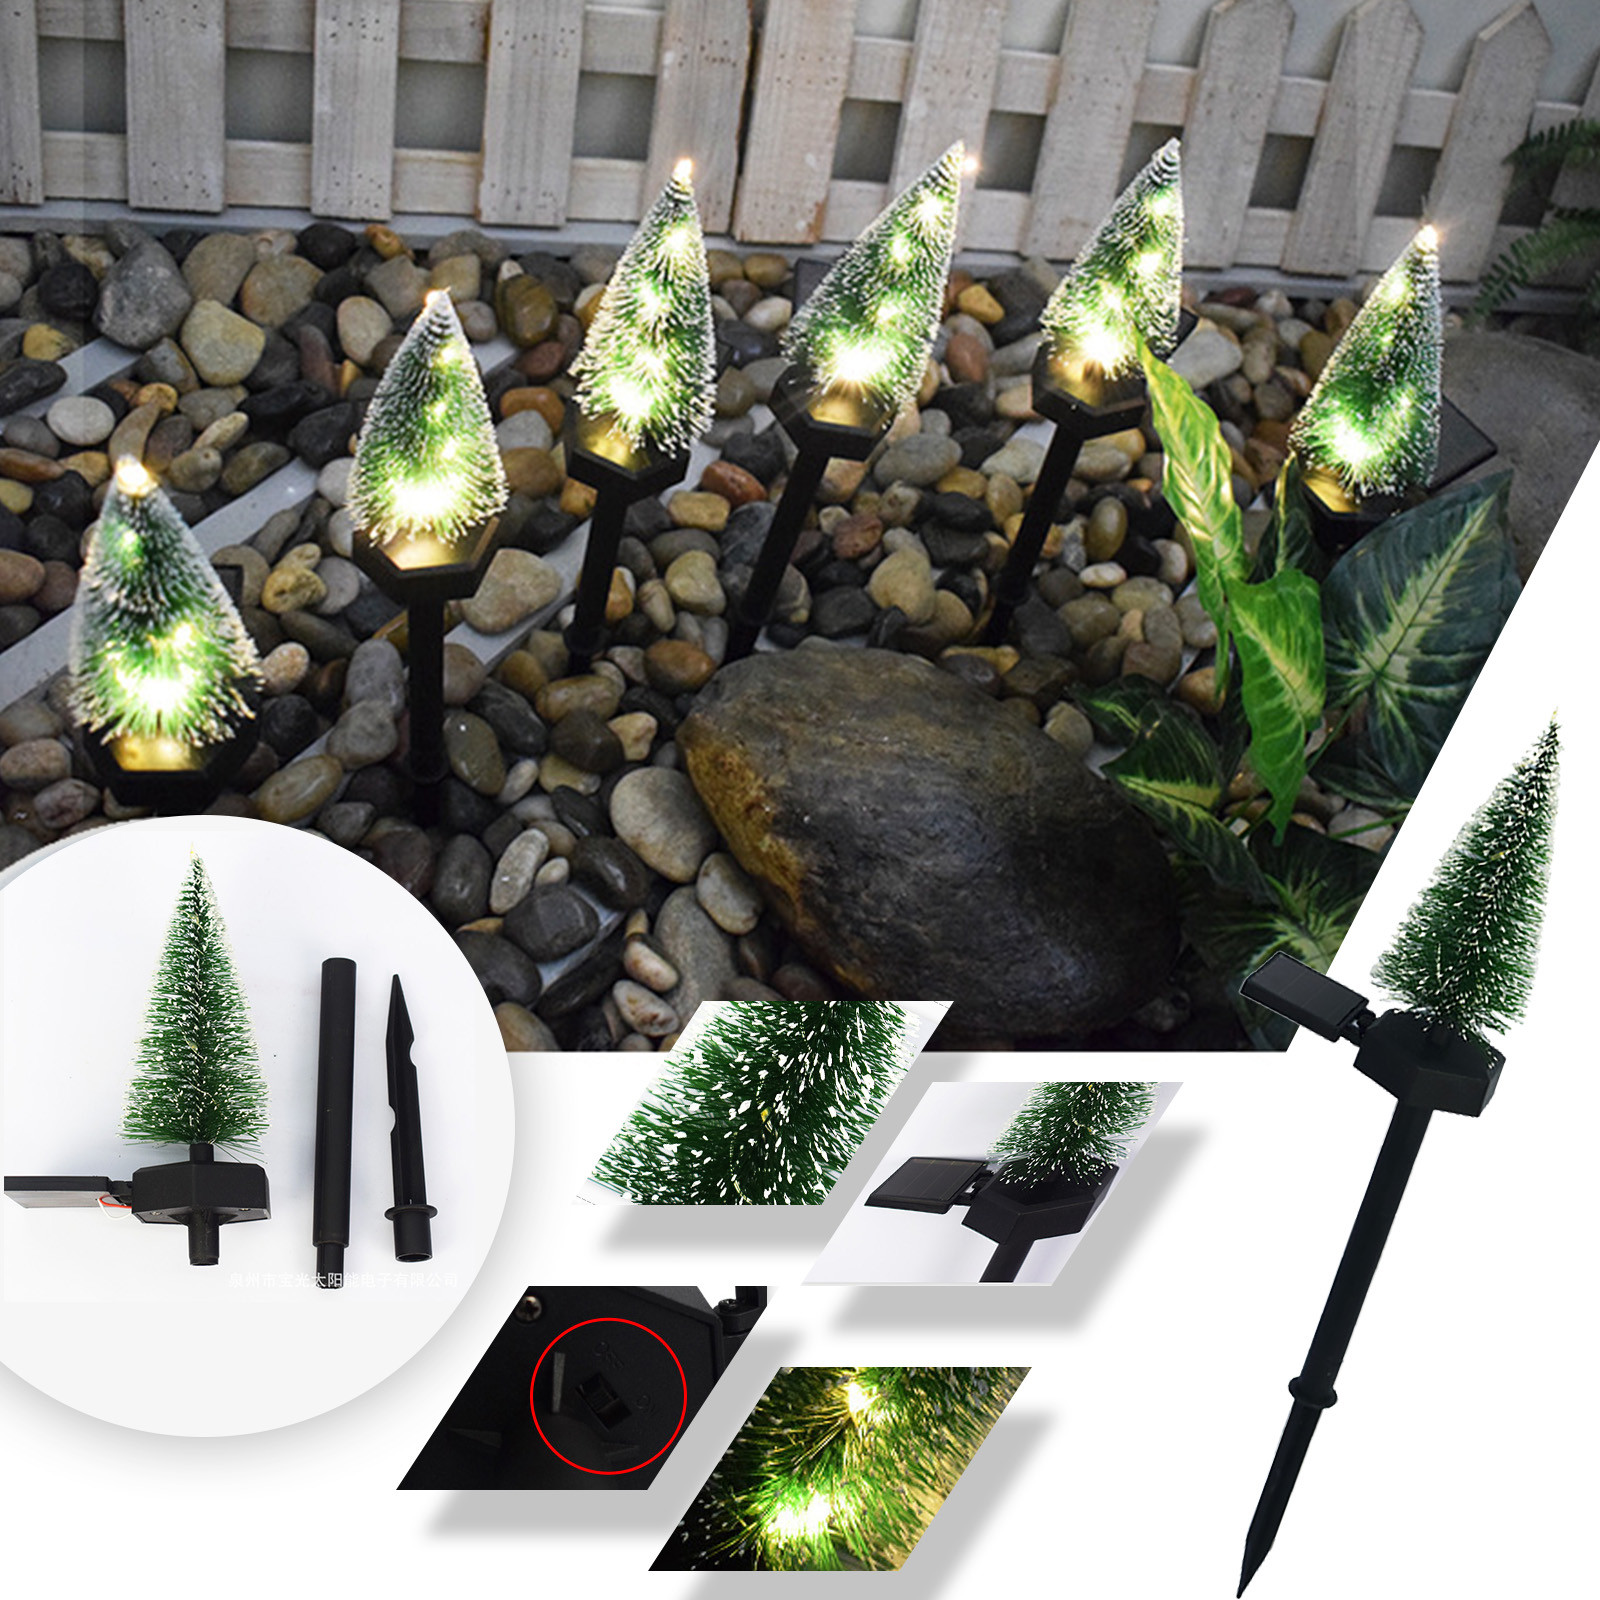 Christmas-Tree-Lights-Led-Solar-Light-For-Garden-Decoration-Lawn-Lamp-Outdoor-Home-Pathway-Bulb-Wate-1918433-7